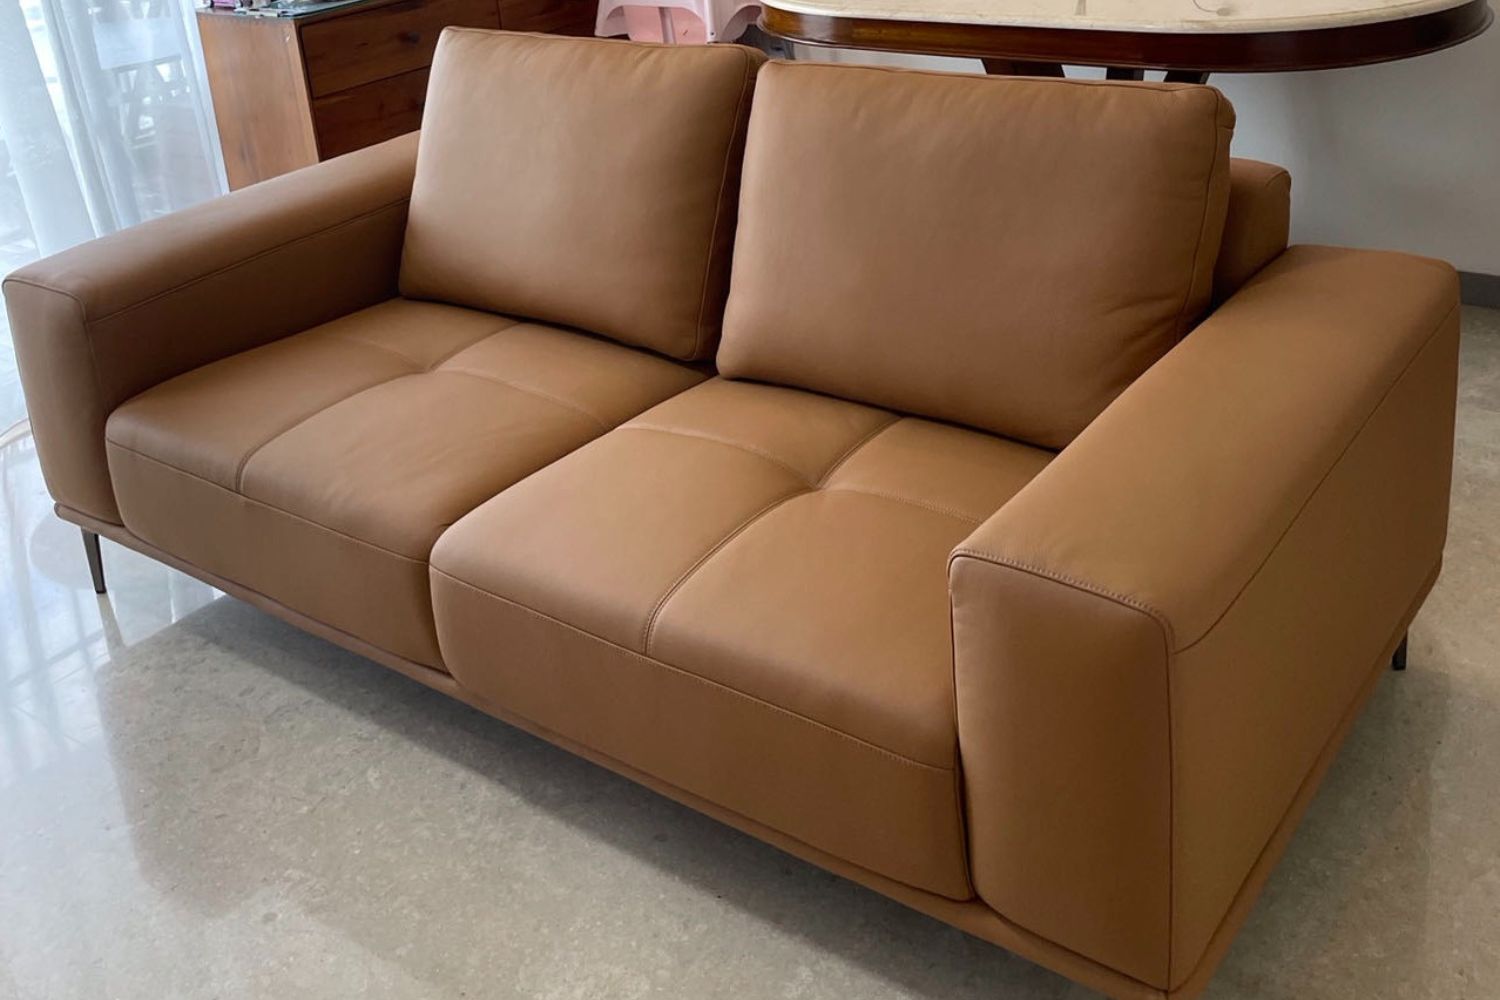 Calm leather sofa in brown